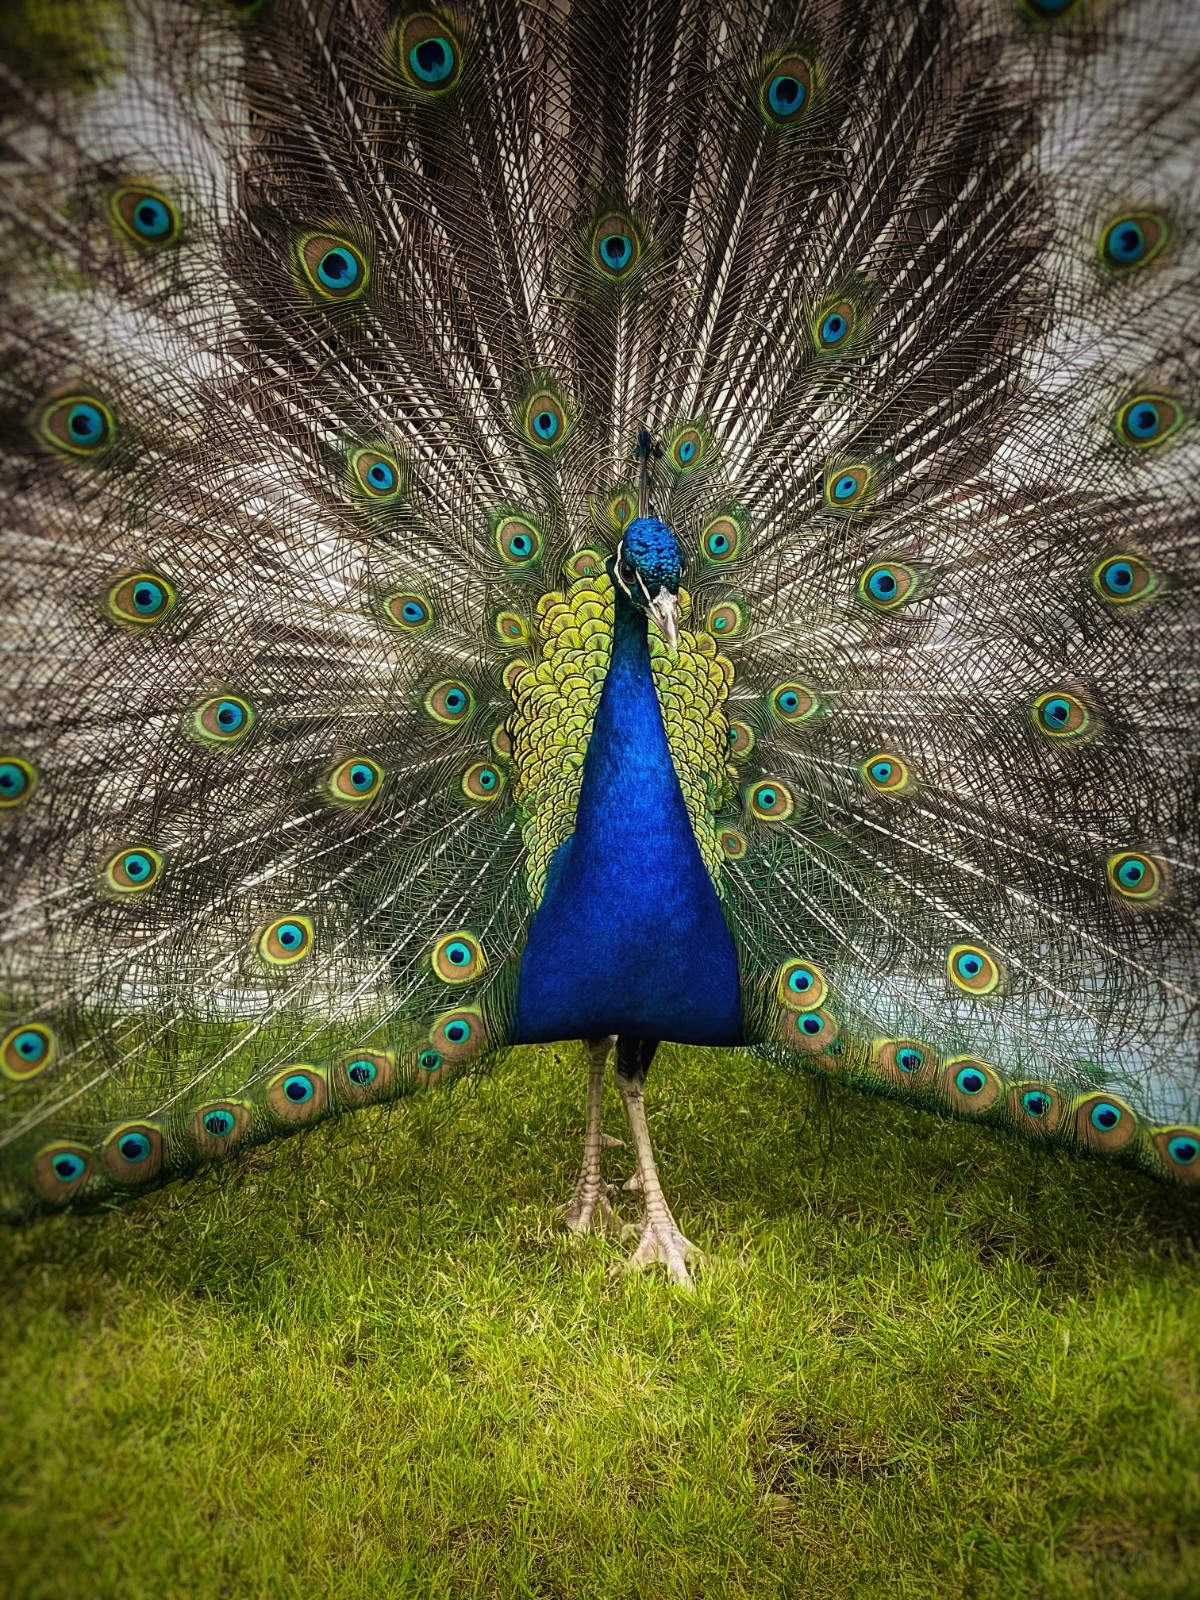 Our visting peacock